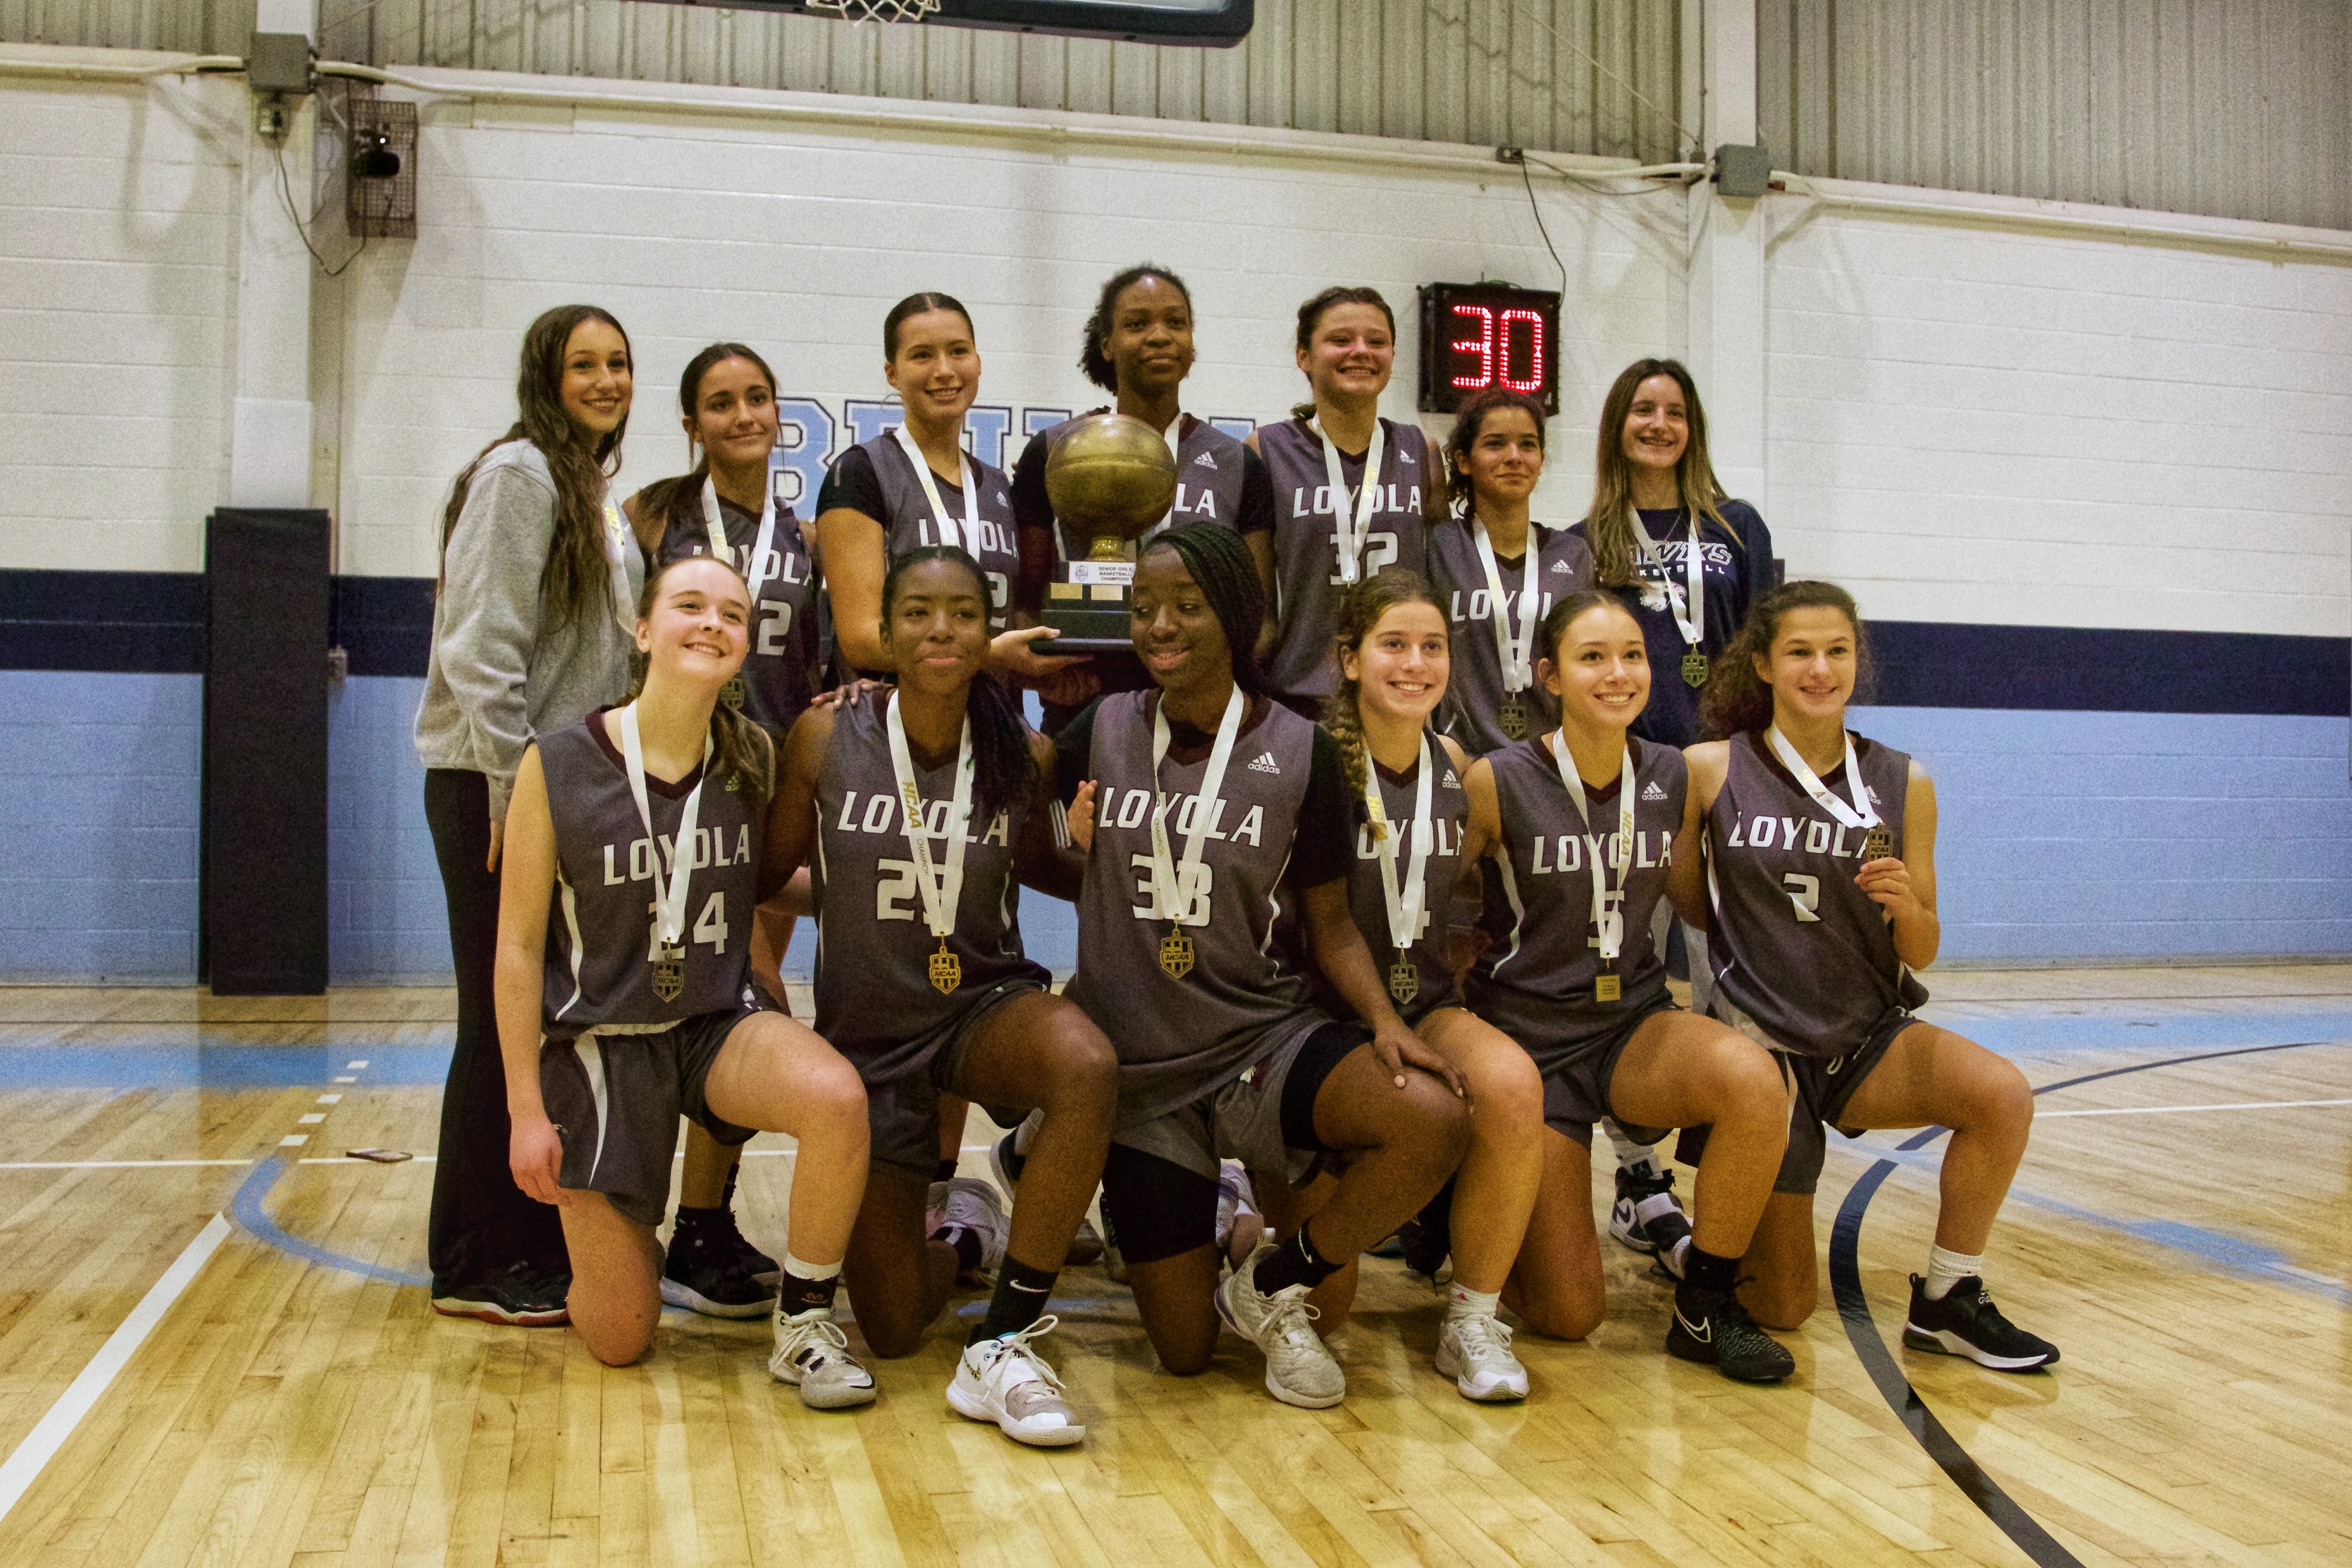 Champions! | The Hawks soared to a comprehensive win over Bishop Reding in the HCAA Sr. Girl